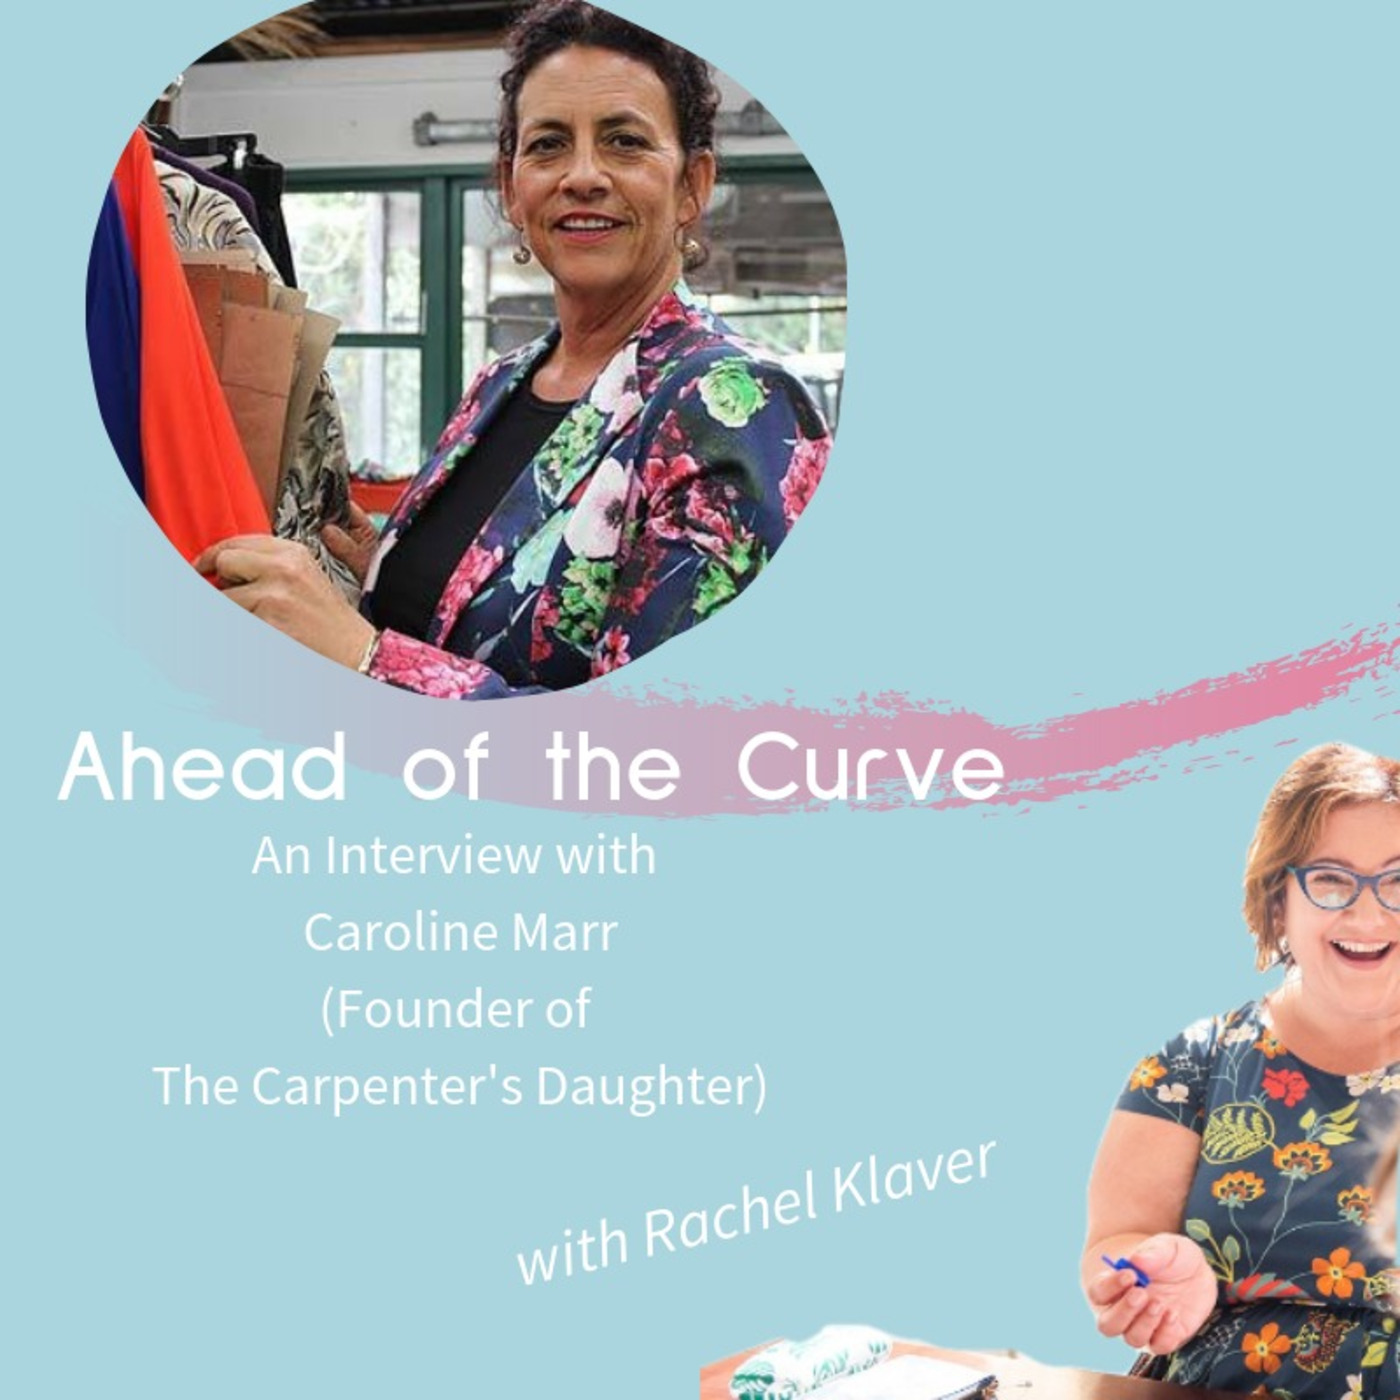 Ahead of the Curve - an Interview with Caroline Marr, founder of The Carpenter's Daughter